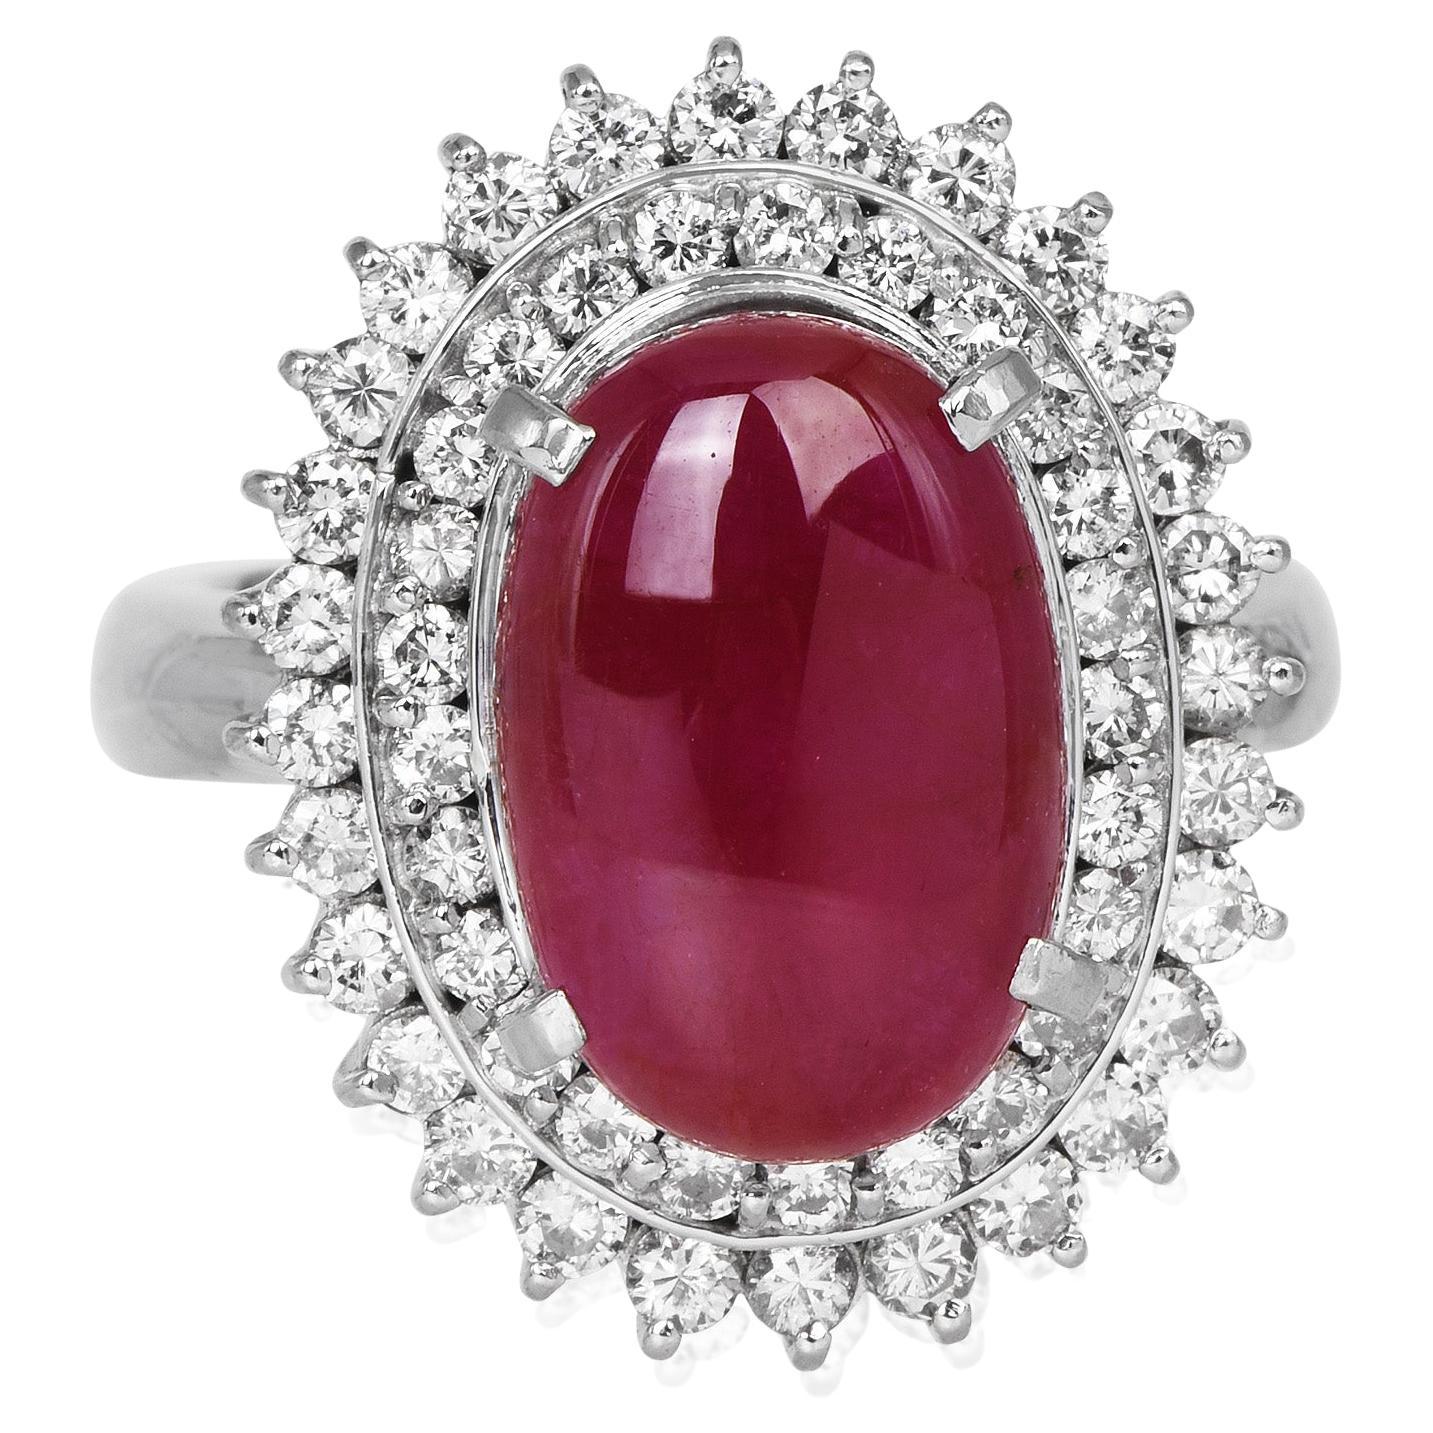  This chic ruby and diamond cocktail ring is crafted in solid platinum, weighing 11.8 grams and 15 mm x 20 mm x 9 mm in height.

Showcasing a prominent GIA lab reported oval-shaped, prong-set purplish pinkish red ruby, weighing approximately, 2.29